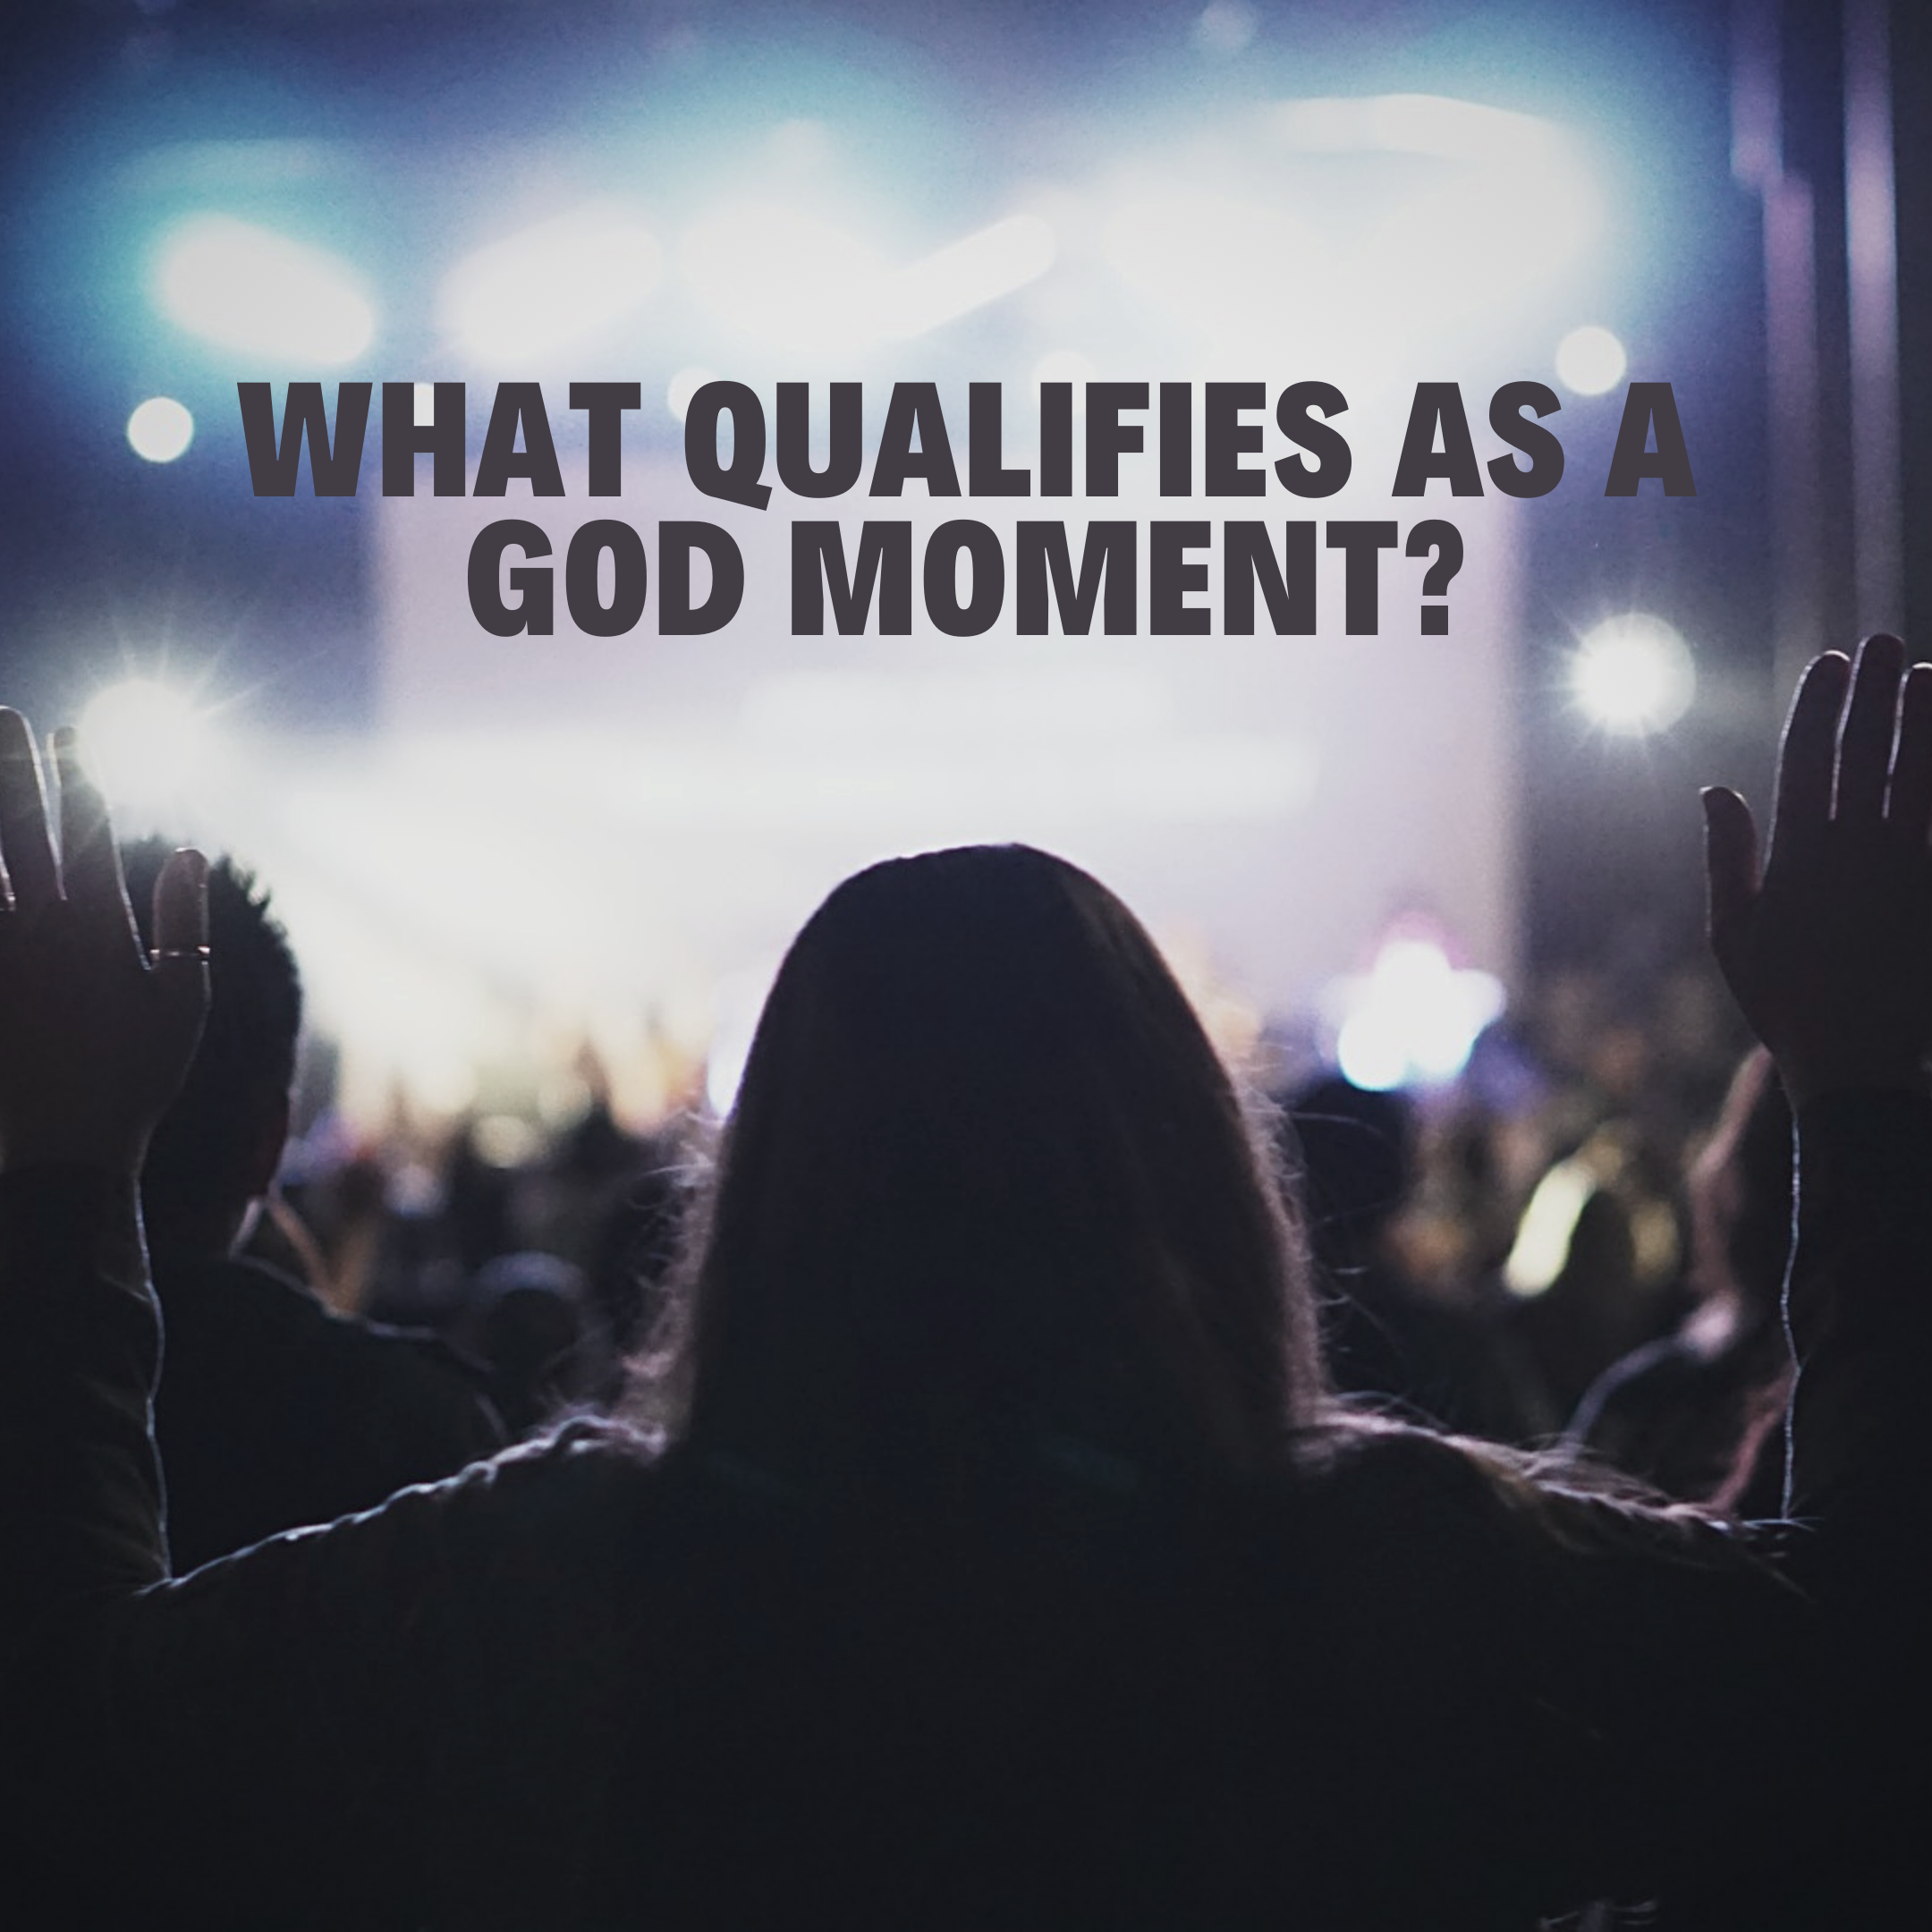 What qualifies as a God moment?